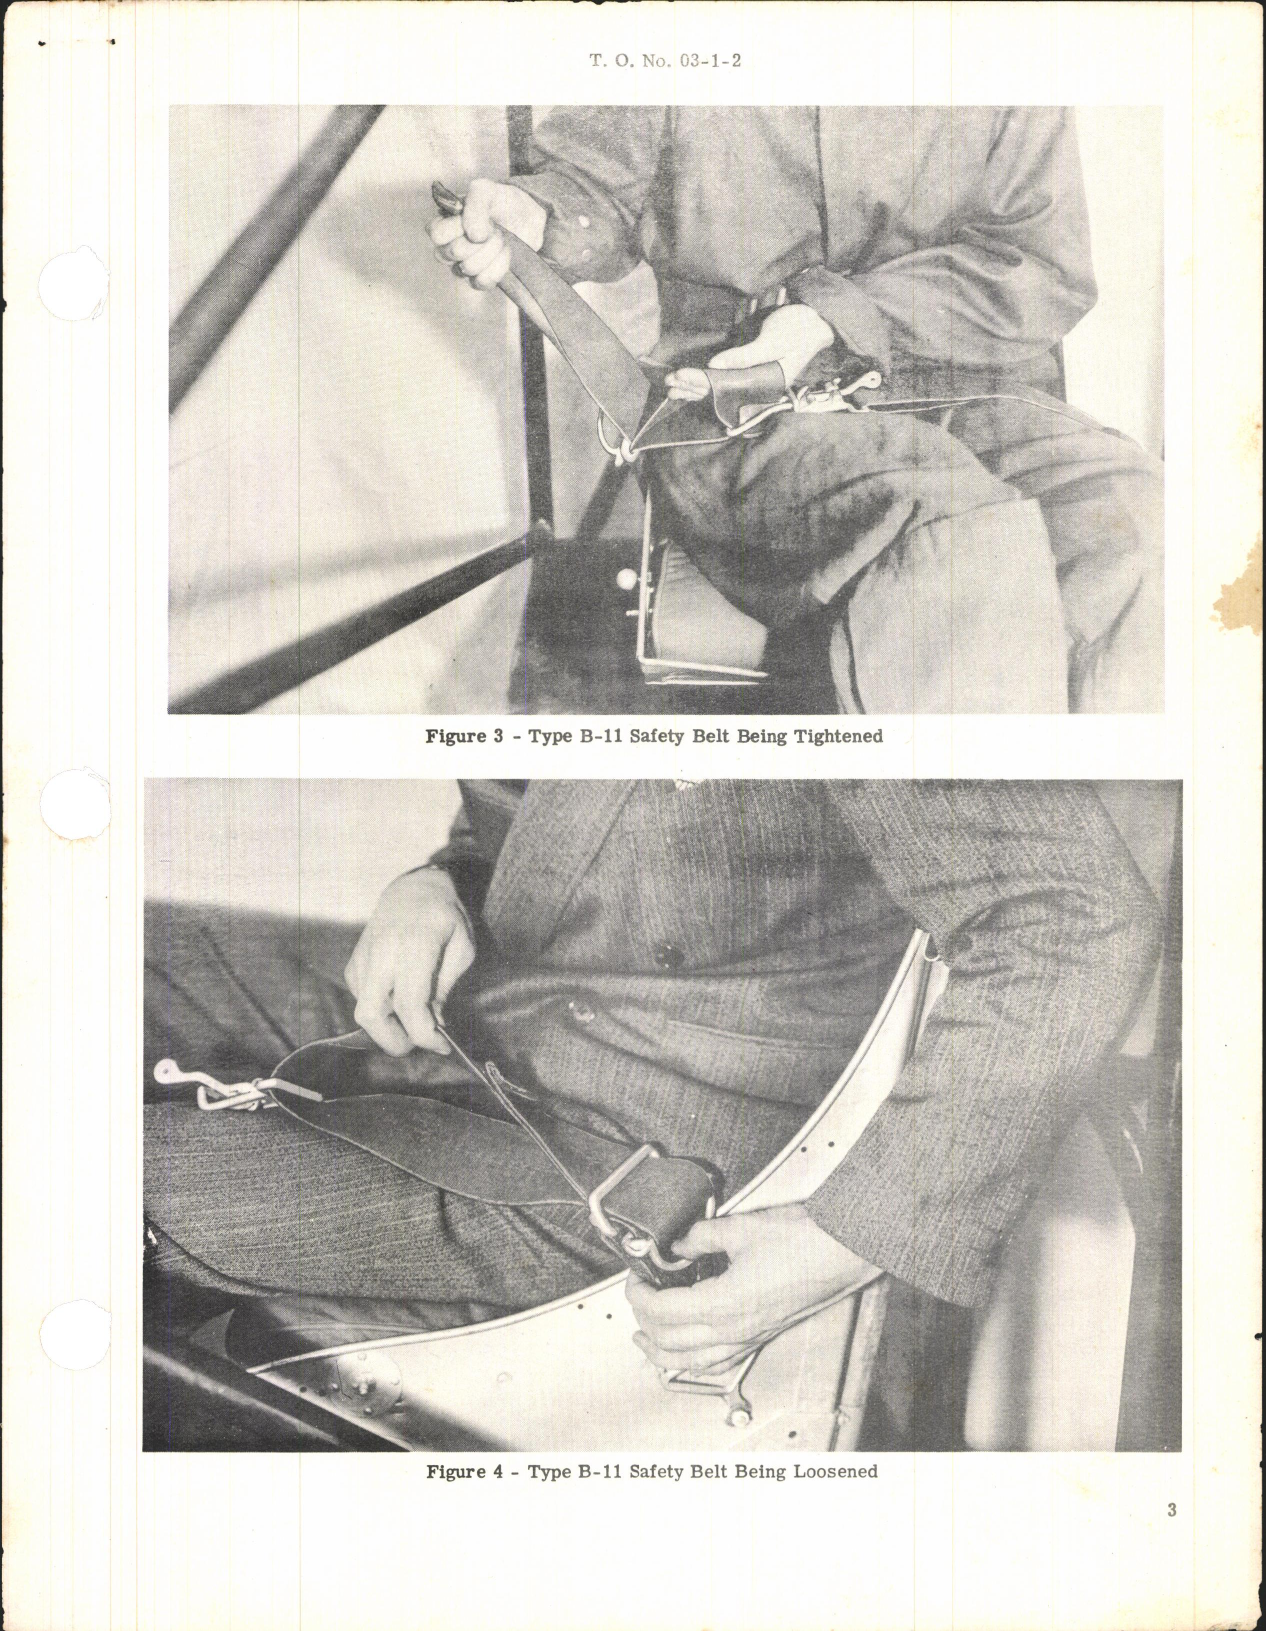 Sample page 3 from AirCorps Library document: USE, Inspection, Cleaning, Repair, and Testing of Safety Belts and Safety Shoulder Hardness